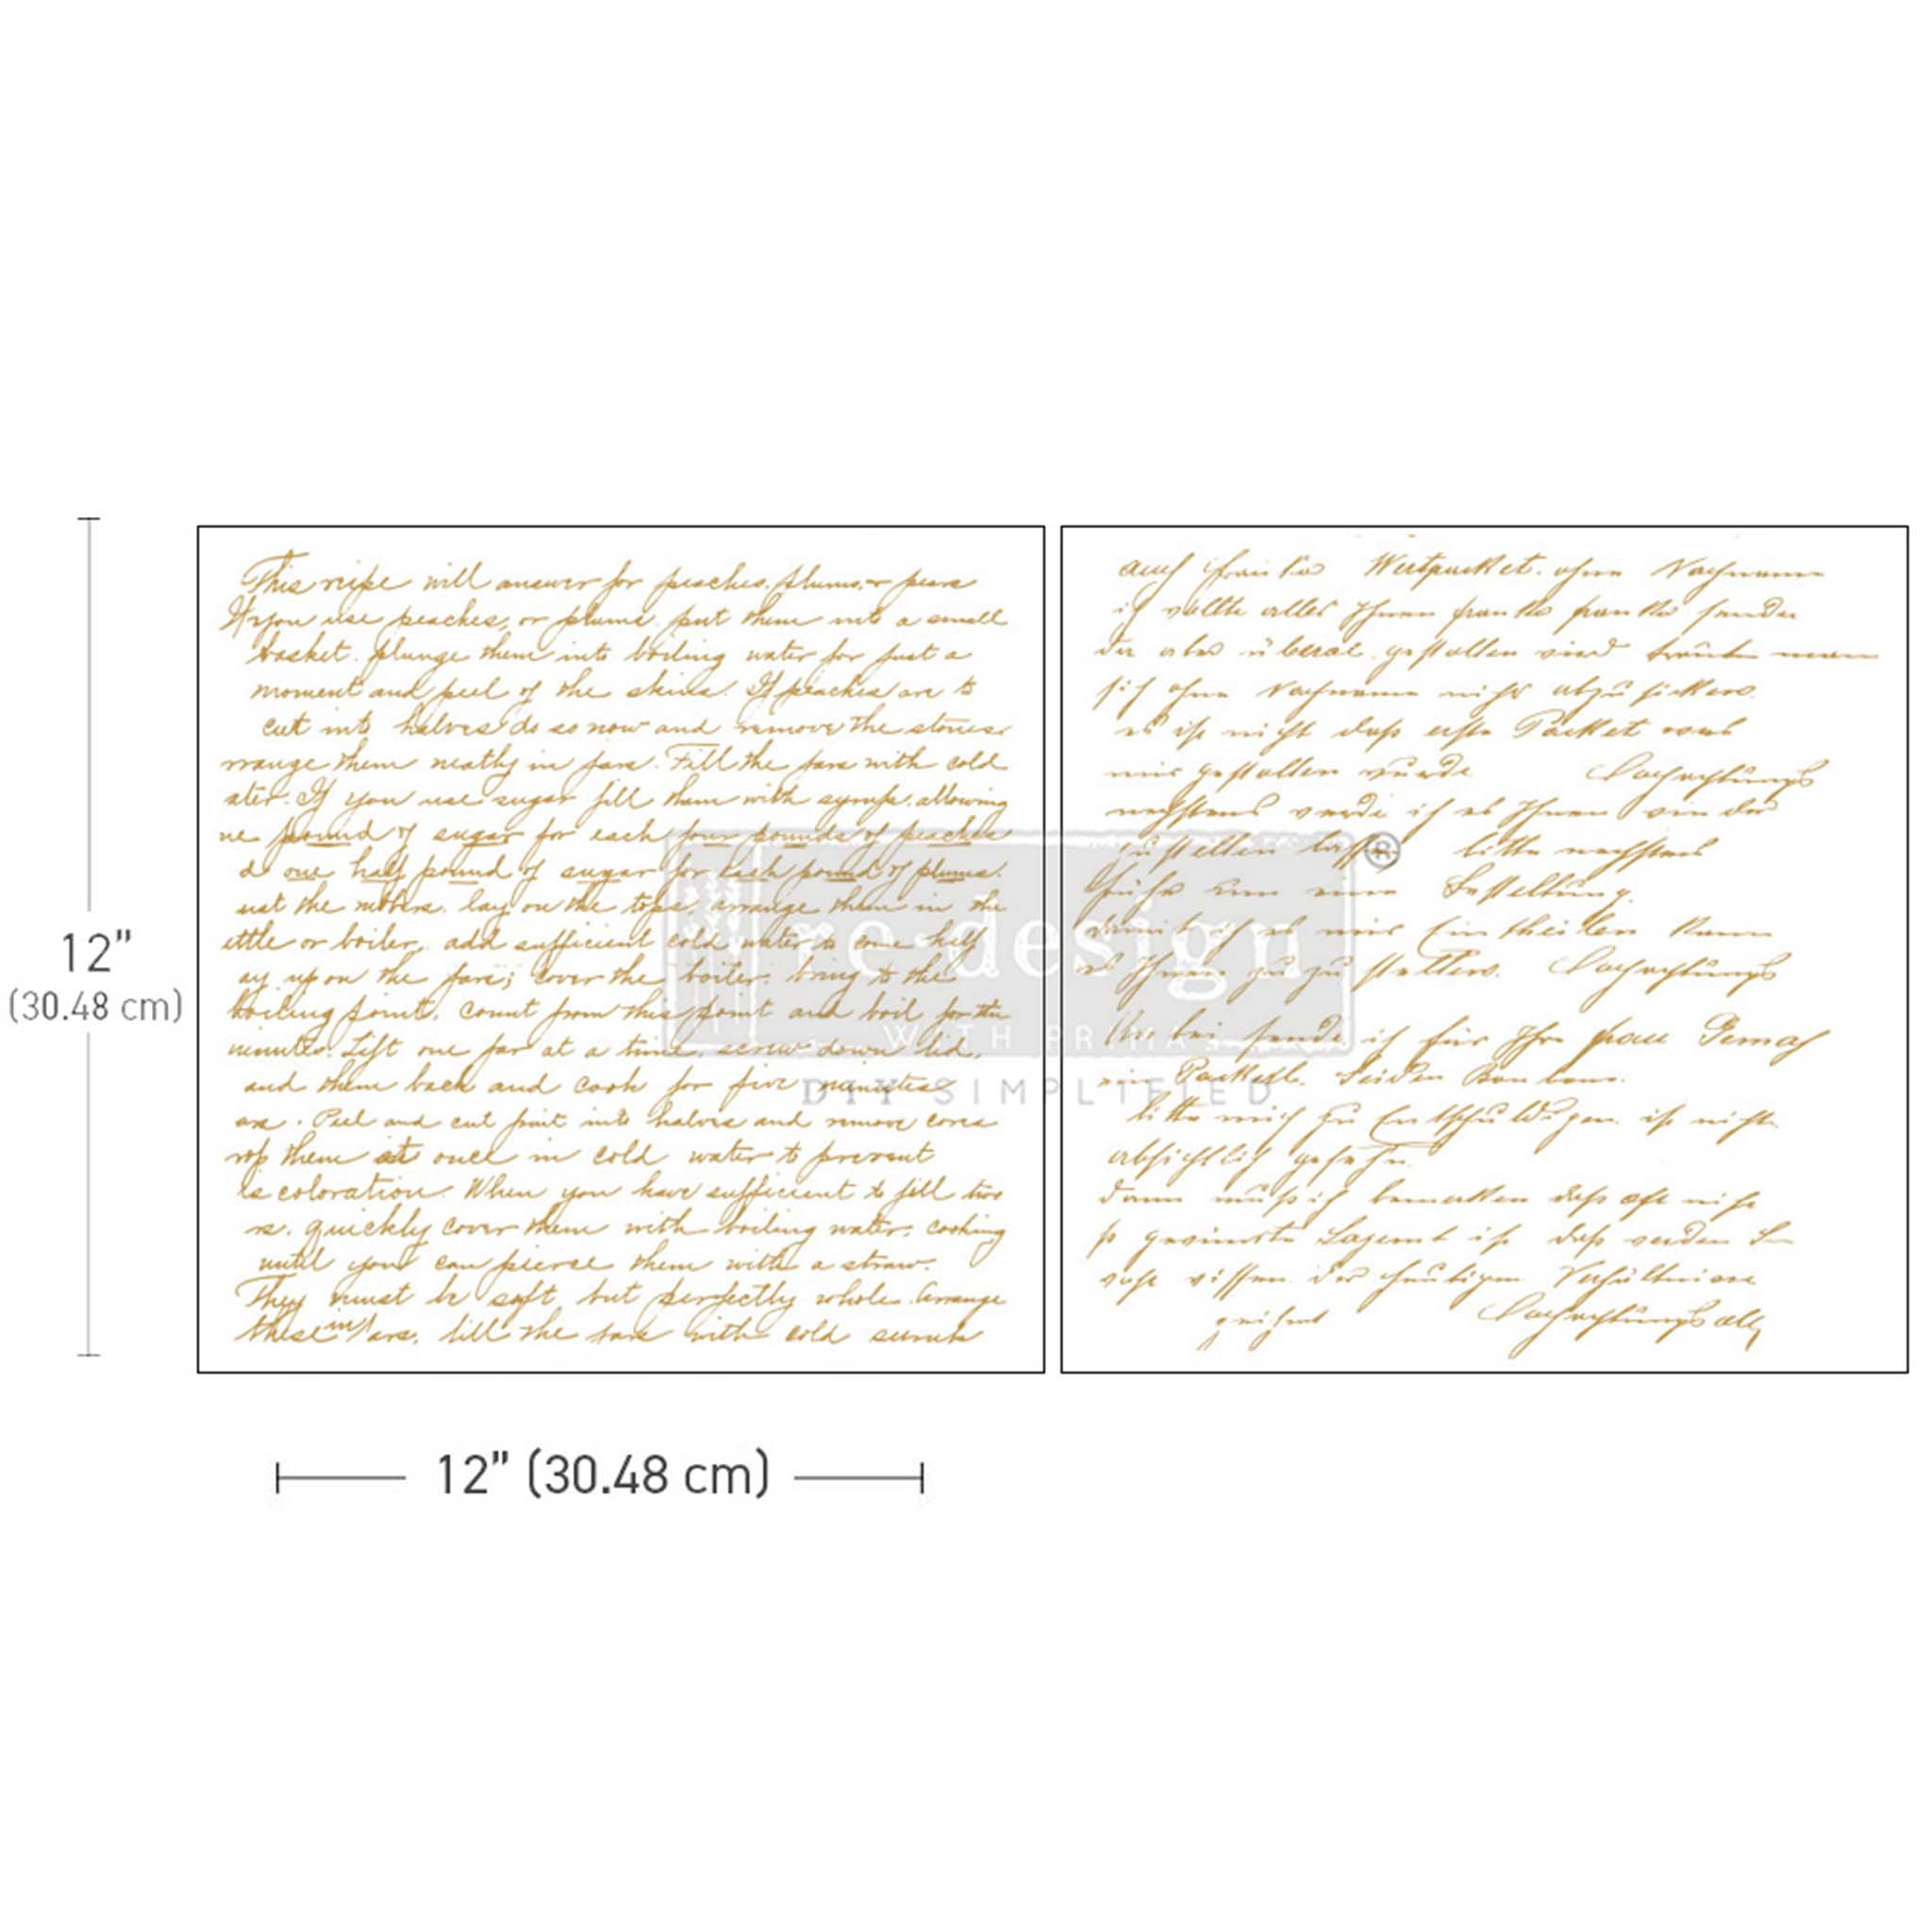 2 sheets of a small rub-on transfer design of gold script handwriting. Measurements for 1 sheet reads: 12" [30.48 cm] by 12" [30.48 cm].